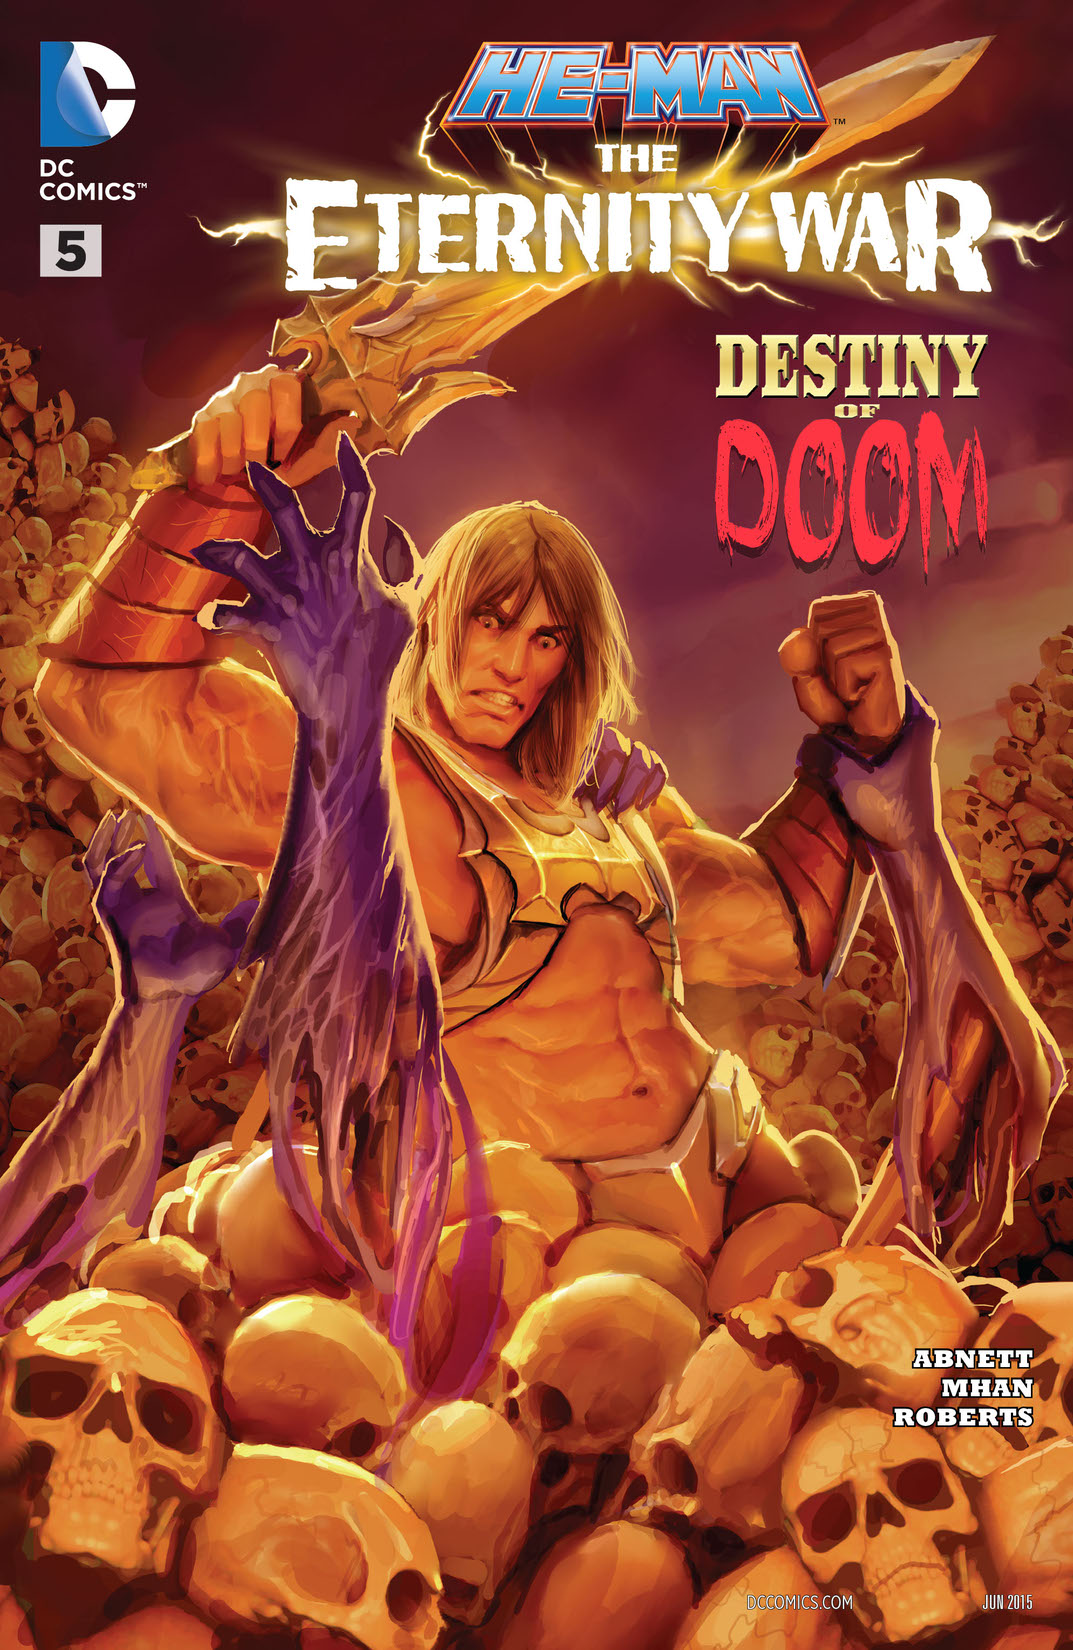 He-Man: The Eternity War #5 preview images